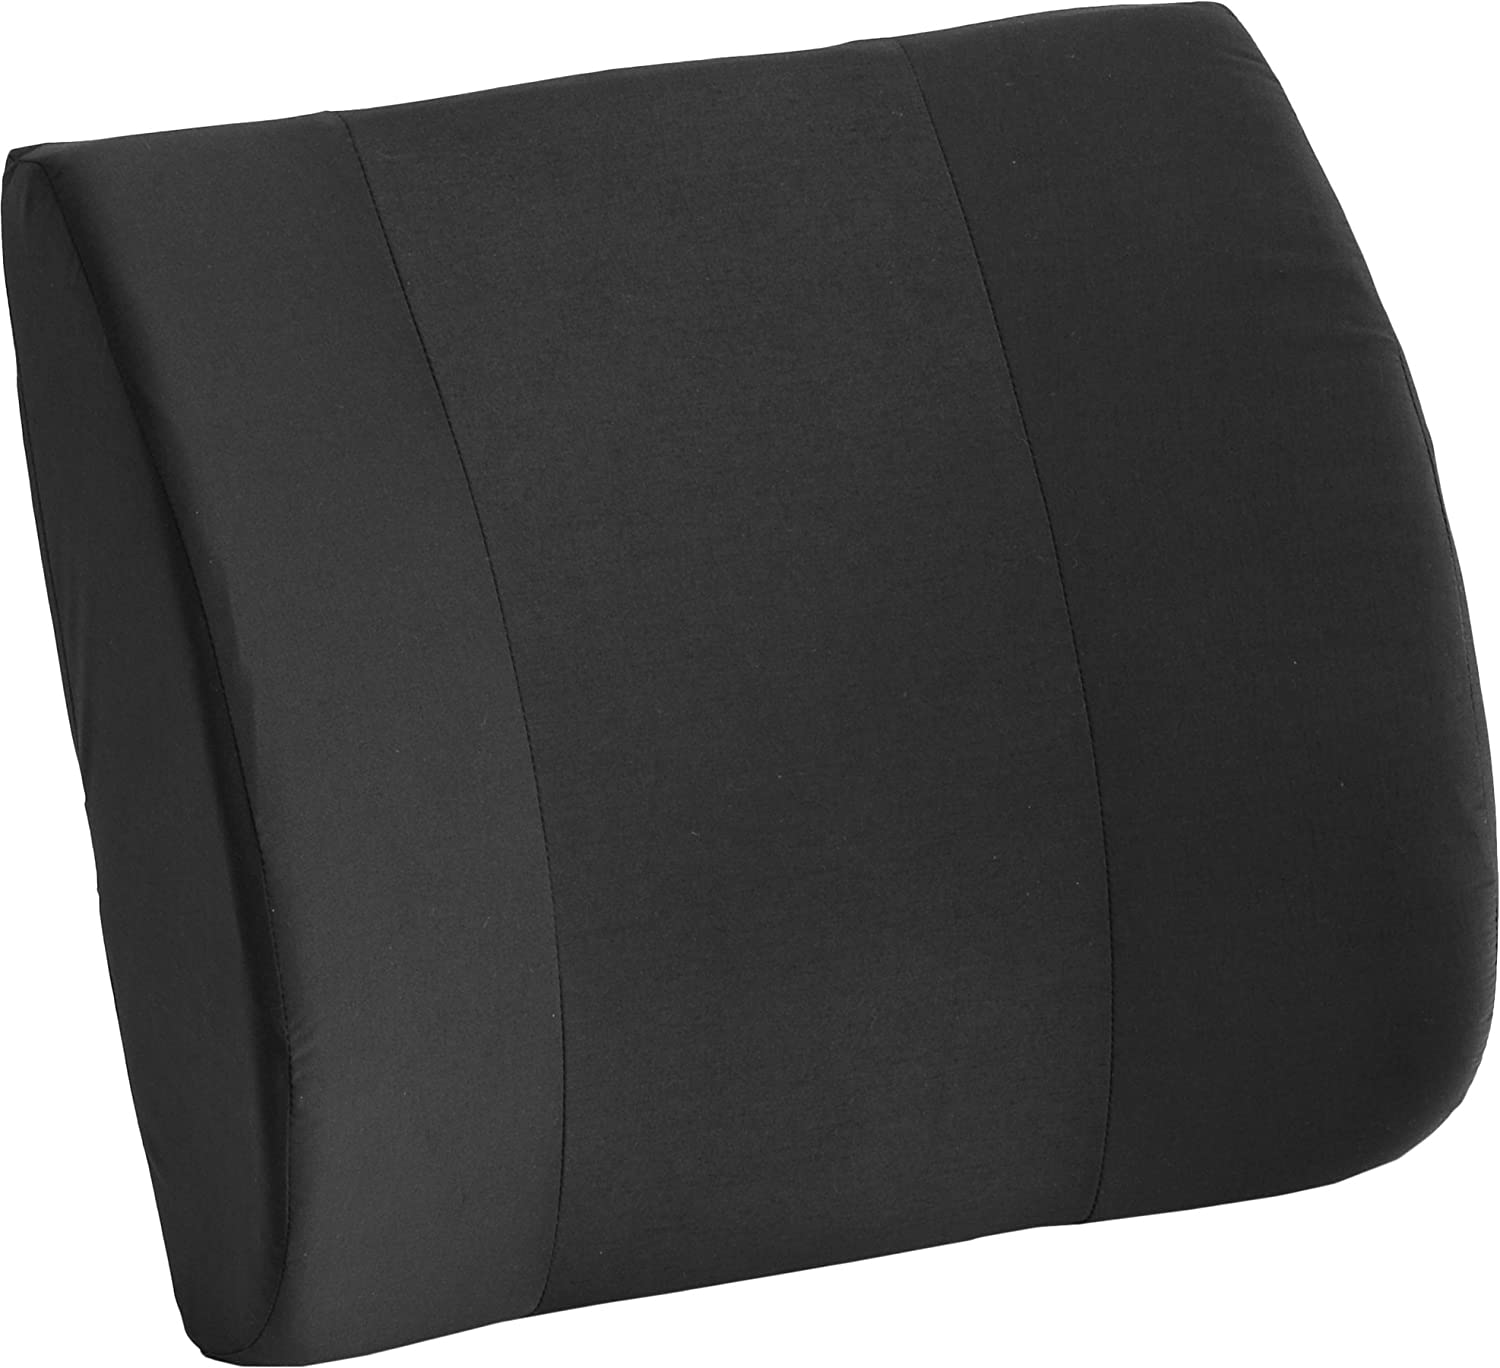 Memory Foam Lumbar Support Cushion by Nova - Back Supports For